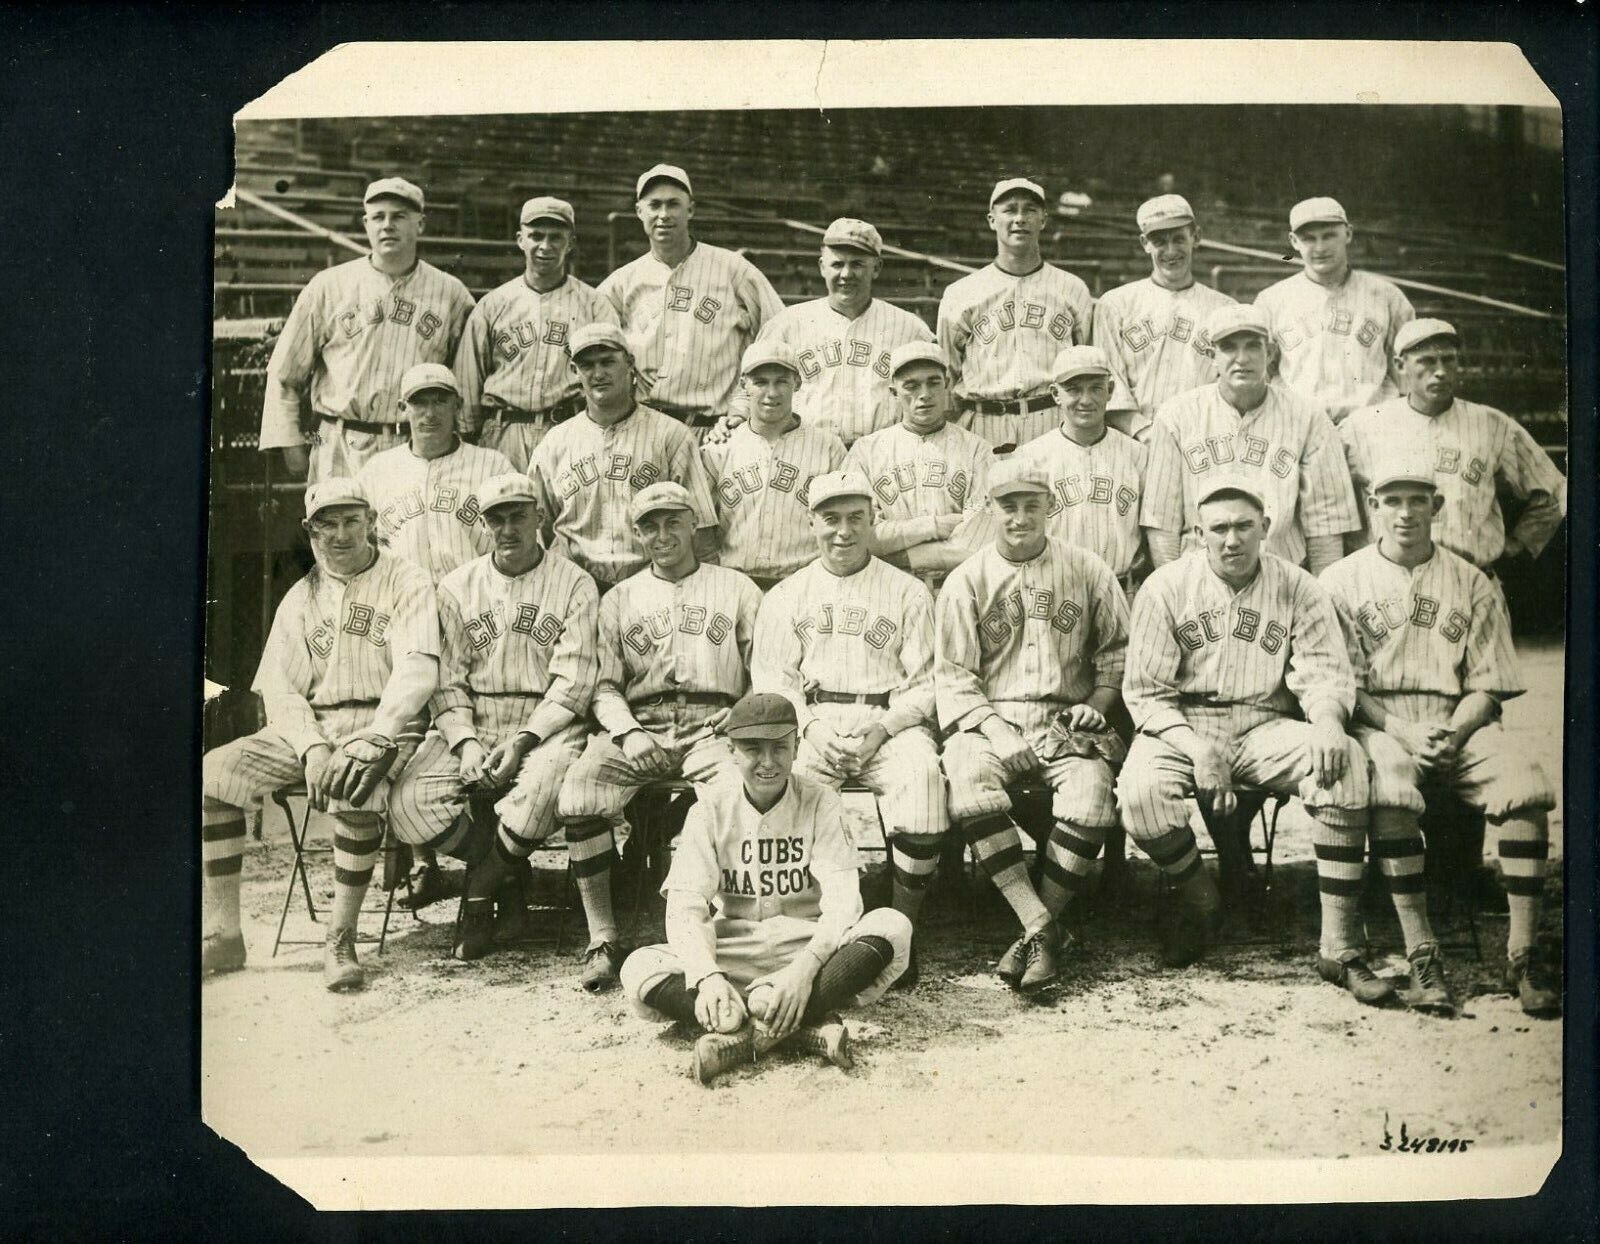 Chicago Cubs 1918 Team Photo Poster painting Type 1 Underwood & Underwood Press Photo Poster painting